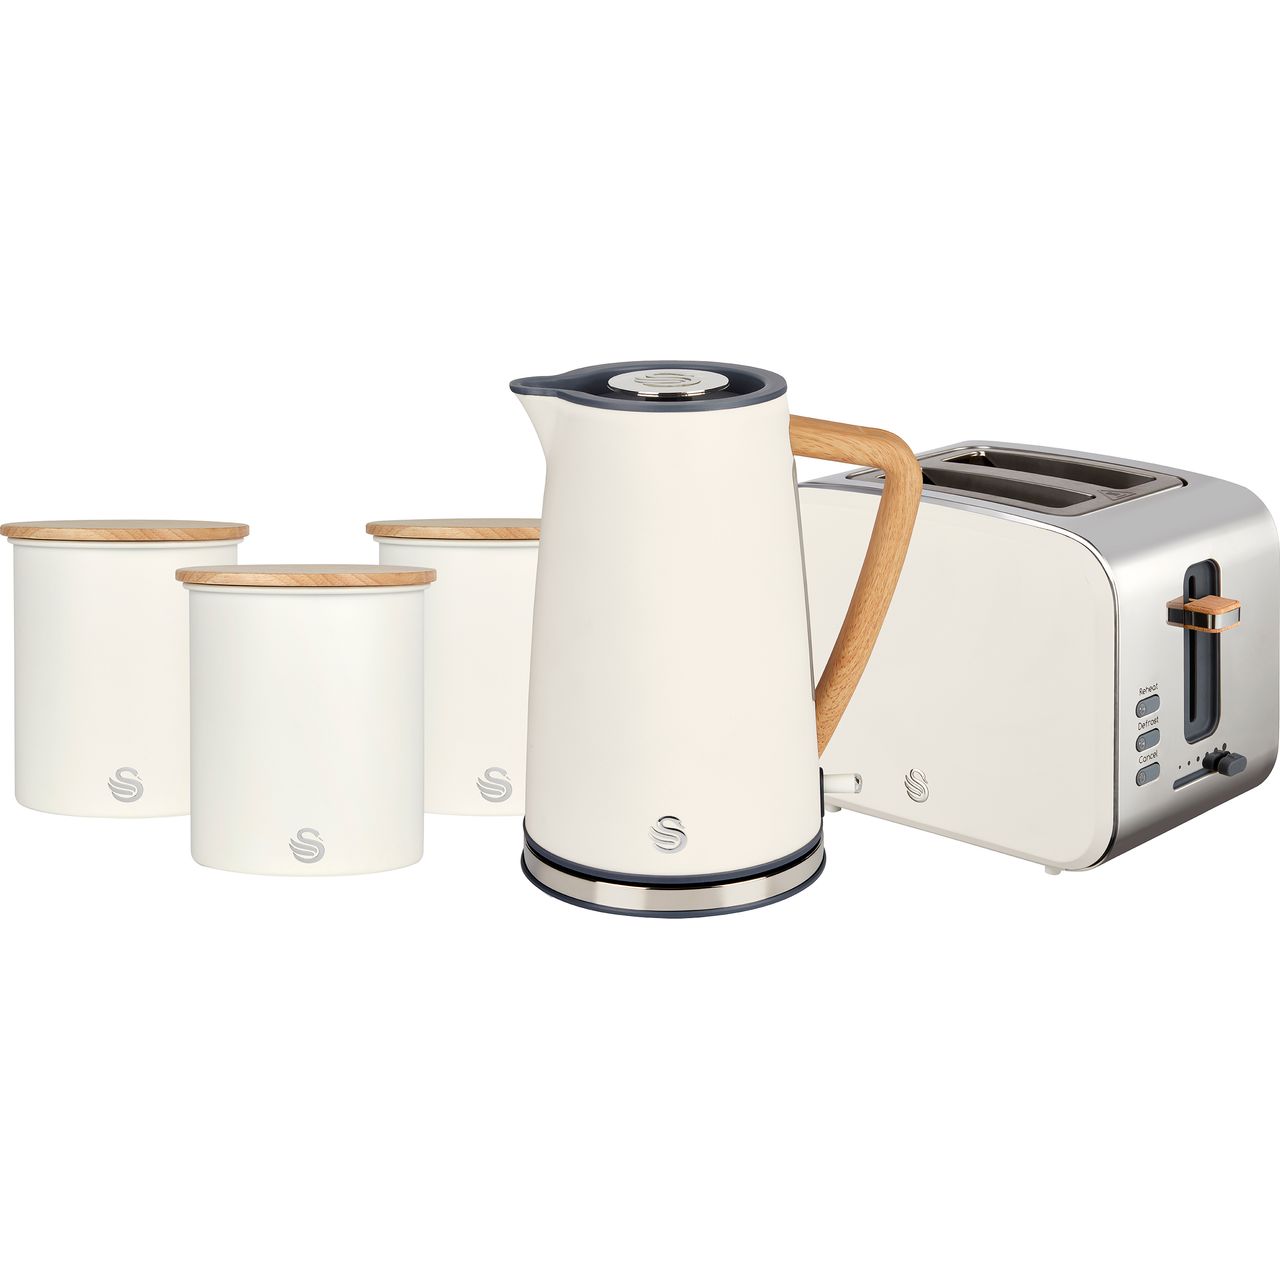 Swan Nordic STRP3025WHTN Kettle And Toaster Sets Review